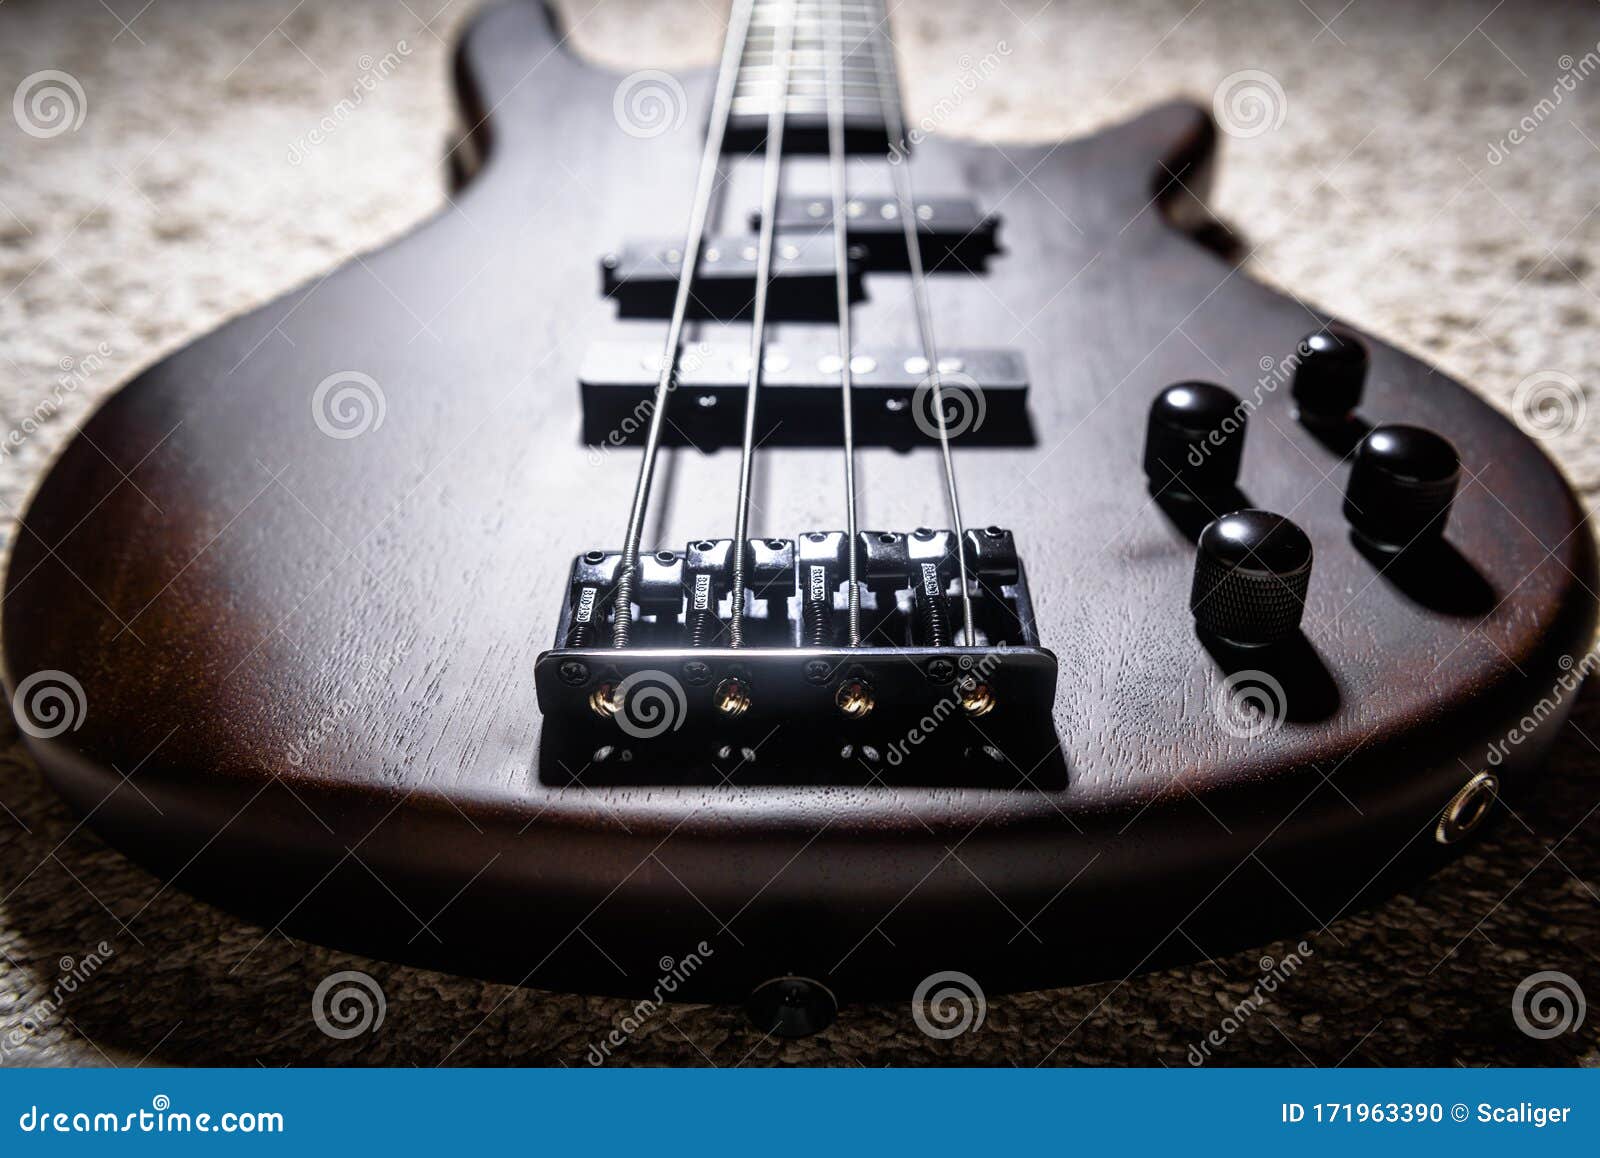 bass electric guitar with four strings closeup. detail of popular rock musical instrument. close view of bass, focus on bridge